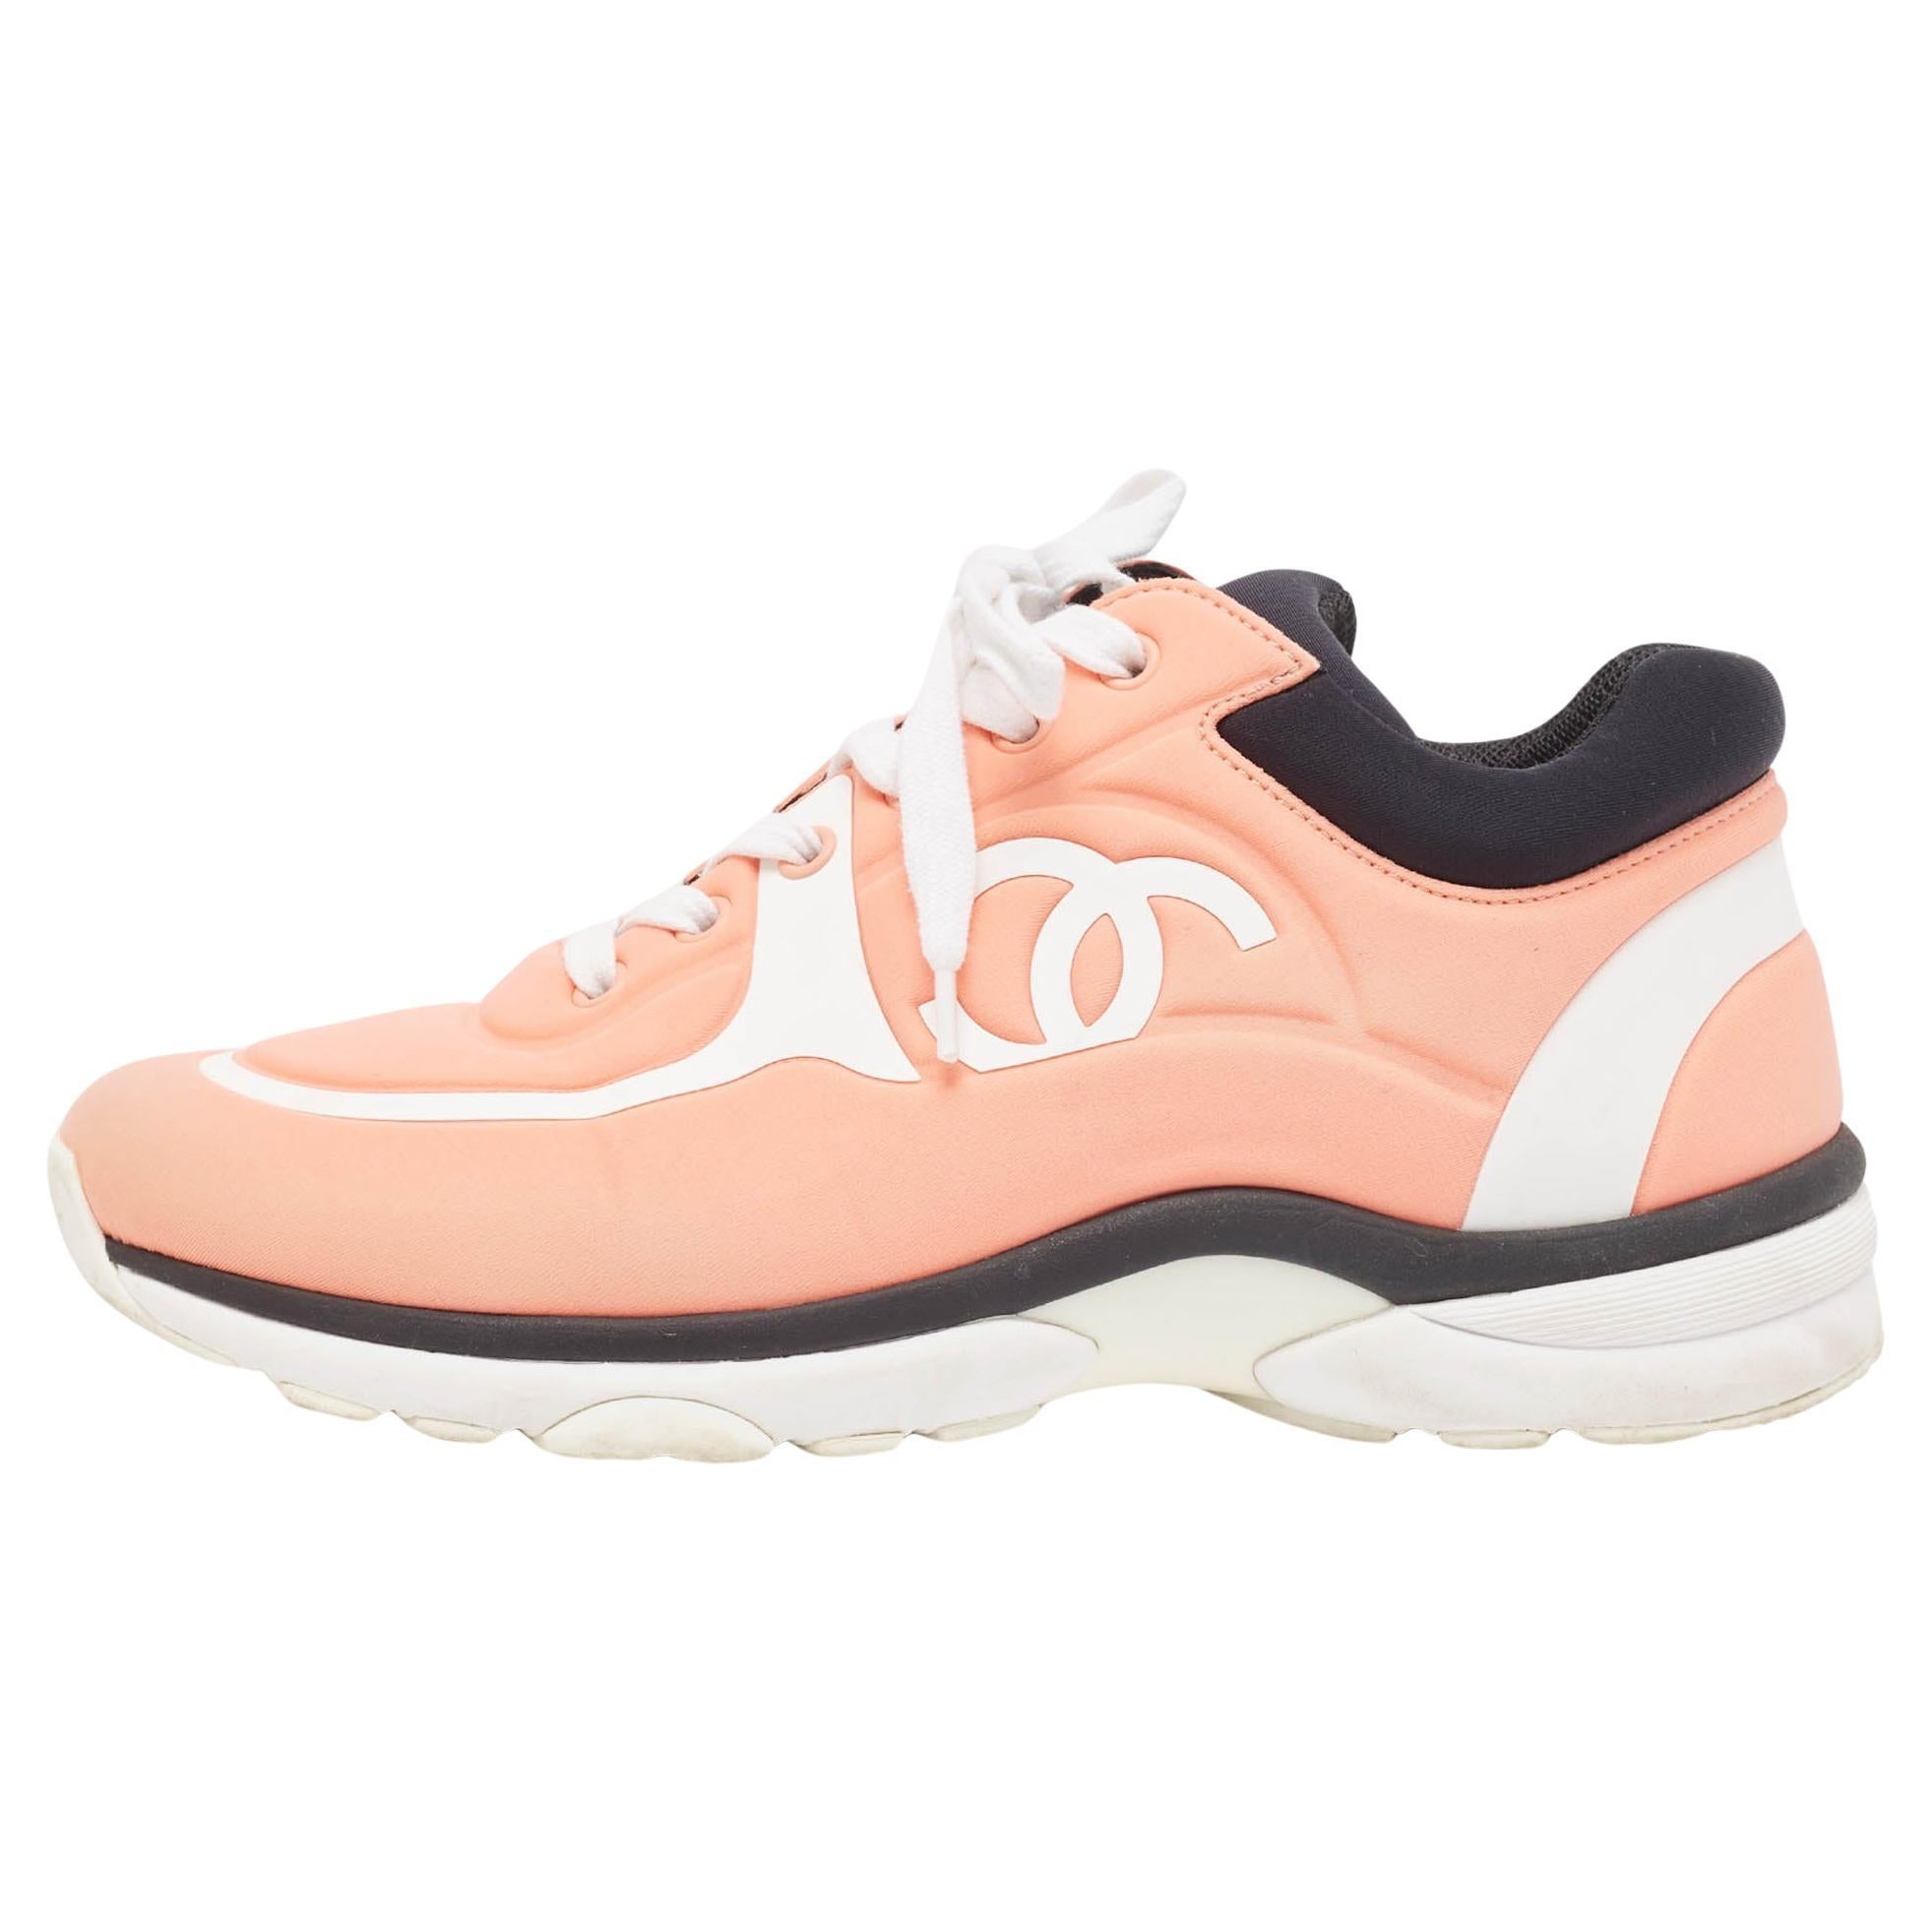 Chanel Coral Pink/White Neoprene CC Low Top Sneakers Size 37.5 For Sale